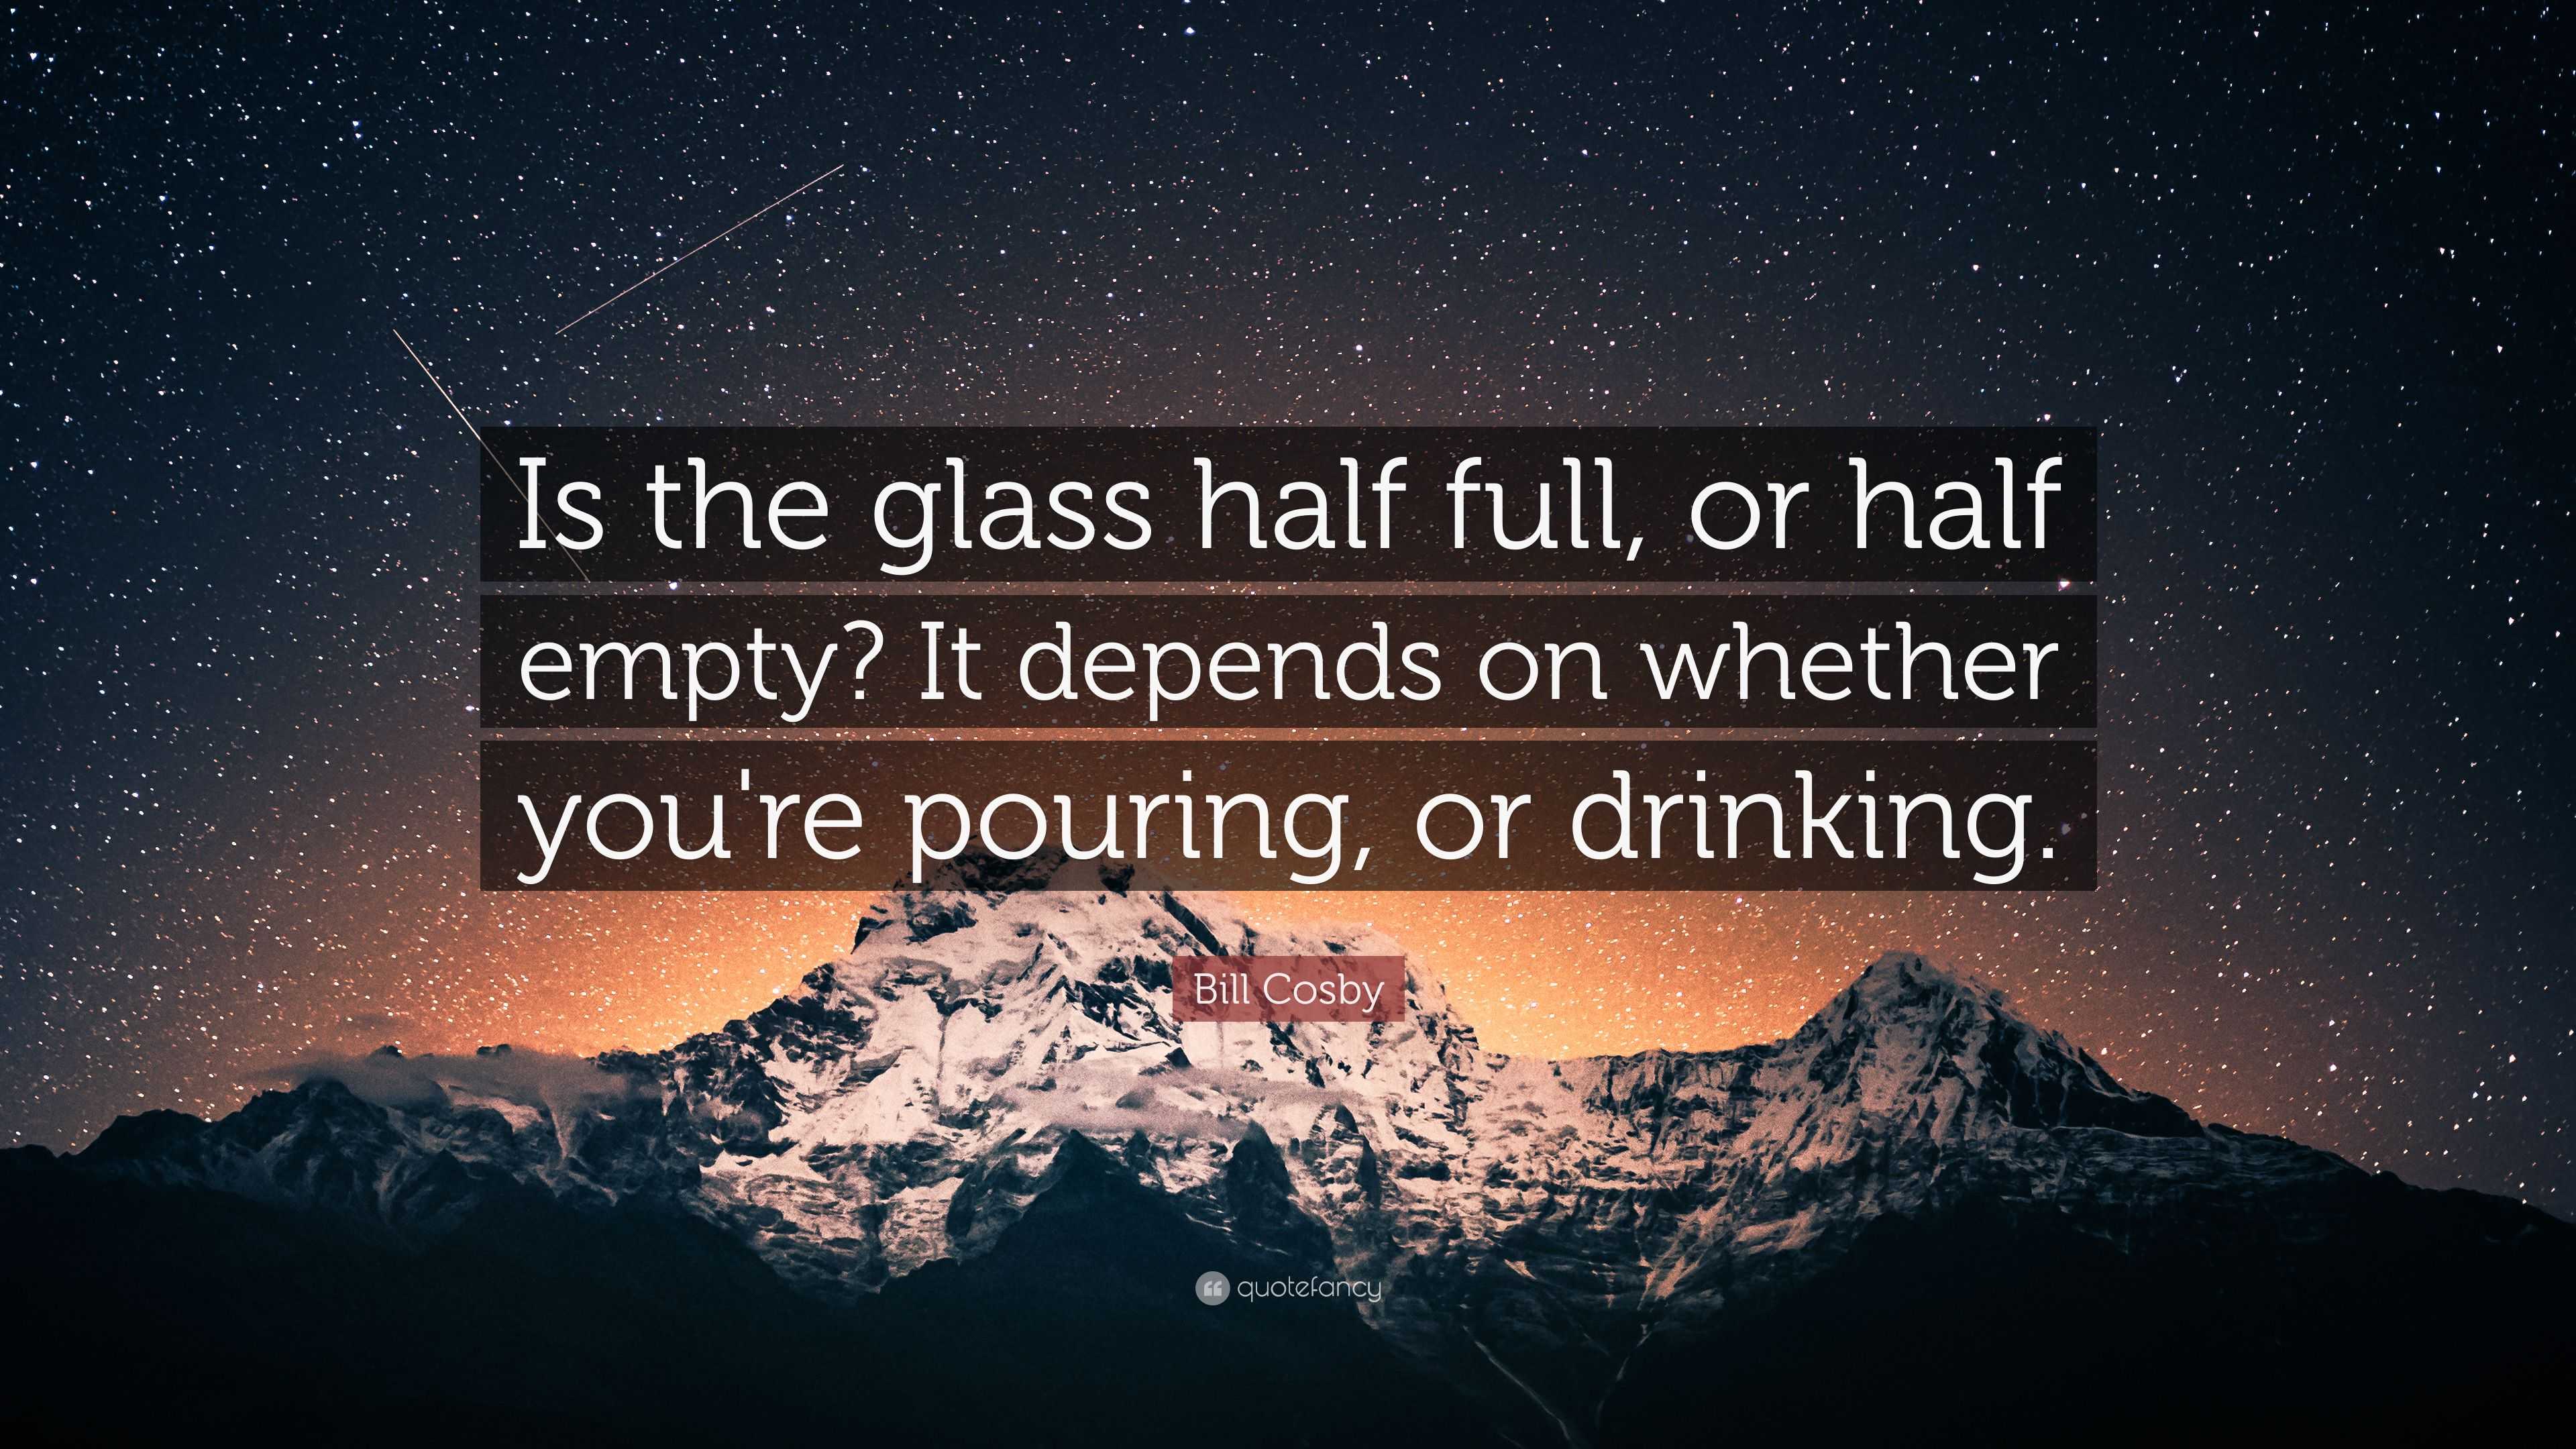 Bill Cosby Quote “is The Glass Half Full Or Half Empty It Depends On Whether Youre Pouring